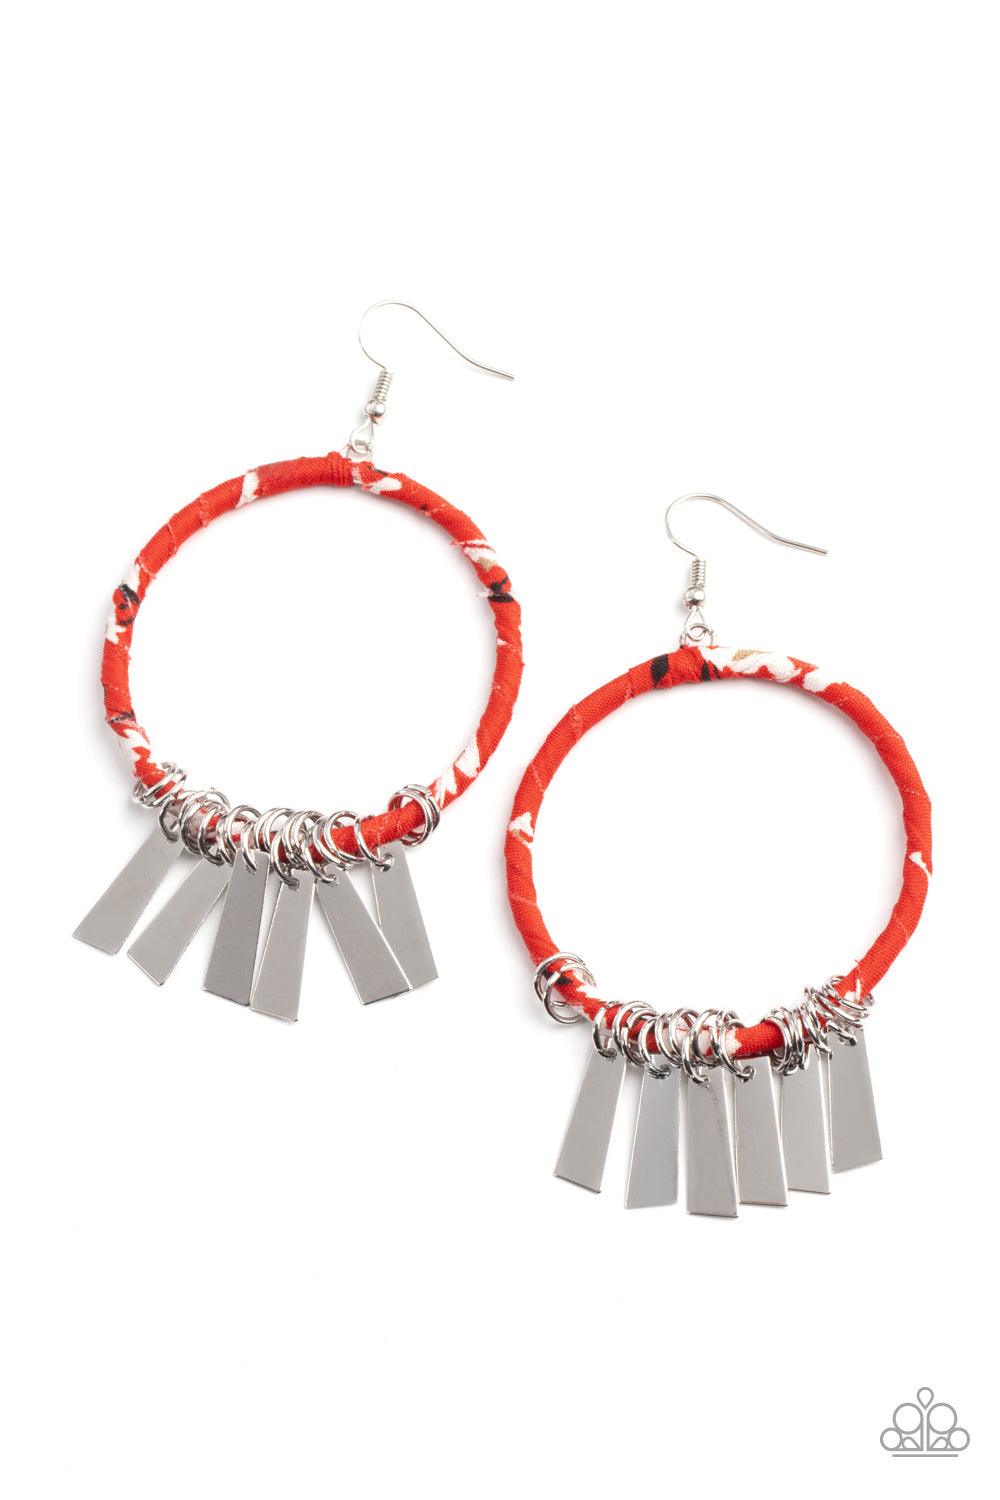 Paparazzi Accessories Garden Chimes - Red Flared rectangular silver plates swing from the bottom of a hoop wrapped in red, black, and white floral fabric, creating a whimsical fringe. Earring attaches to a standard fishhook fitting. Sold as one pair of ea